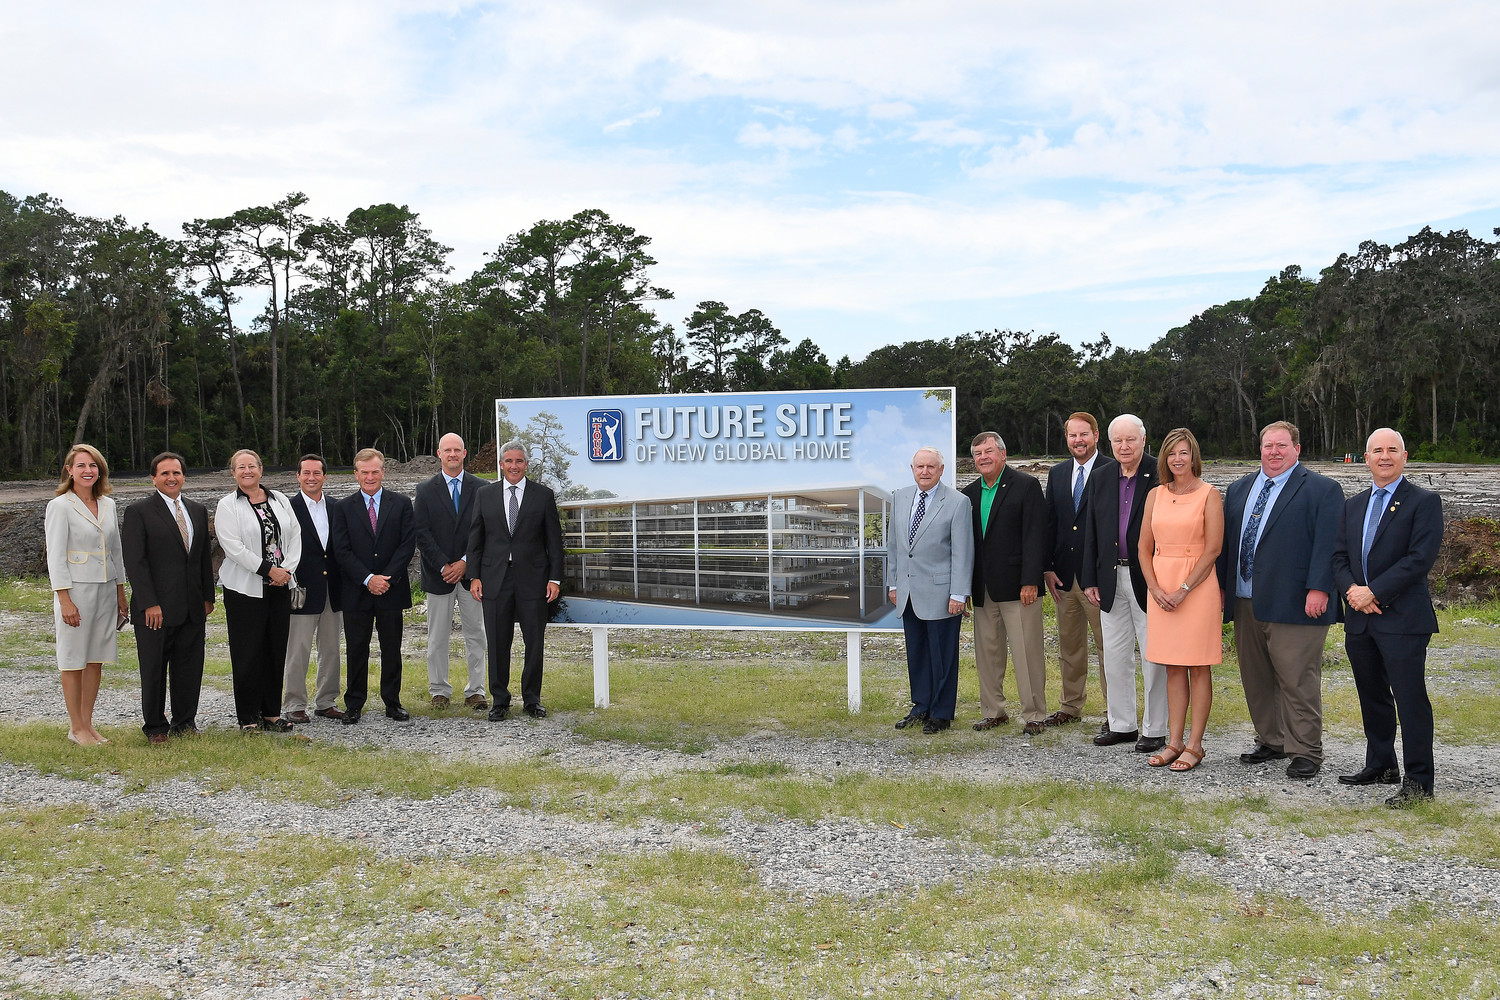 Members of the PGA Tour leadership team, St. Johns County commissioners, administrators and staff officially mark the site of the PGA Tour’s new Global Home at a private event last week. Pictured from left to right are Allison Keller, PGA Tour chief administrative officer;  Jim Triola, COO, PGA Tour golf course properties; Suzanne Konchan, St. Johns County (SJC) growth management director; Jimmy Johns, SJC commissioner; Ron Price, PGA Tour chief operating officer; Jeb Smith, SJC commissioner; Jay Monahan, PGA Tour commissioner; Deane Beman, former PGA Tour commissioner; Henry Dean, chair, board of SJC commissioners; Michael Wanchick, SJC administrator; Jay Morris, SJC commissioner; Melissa Glasgow; SJC economic development director; Paul Waldron, SJC commissioner; and Patrick McCormack; SJC attorney.